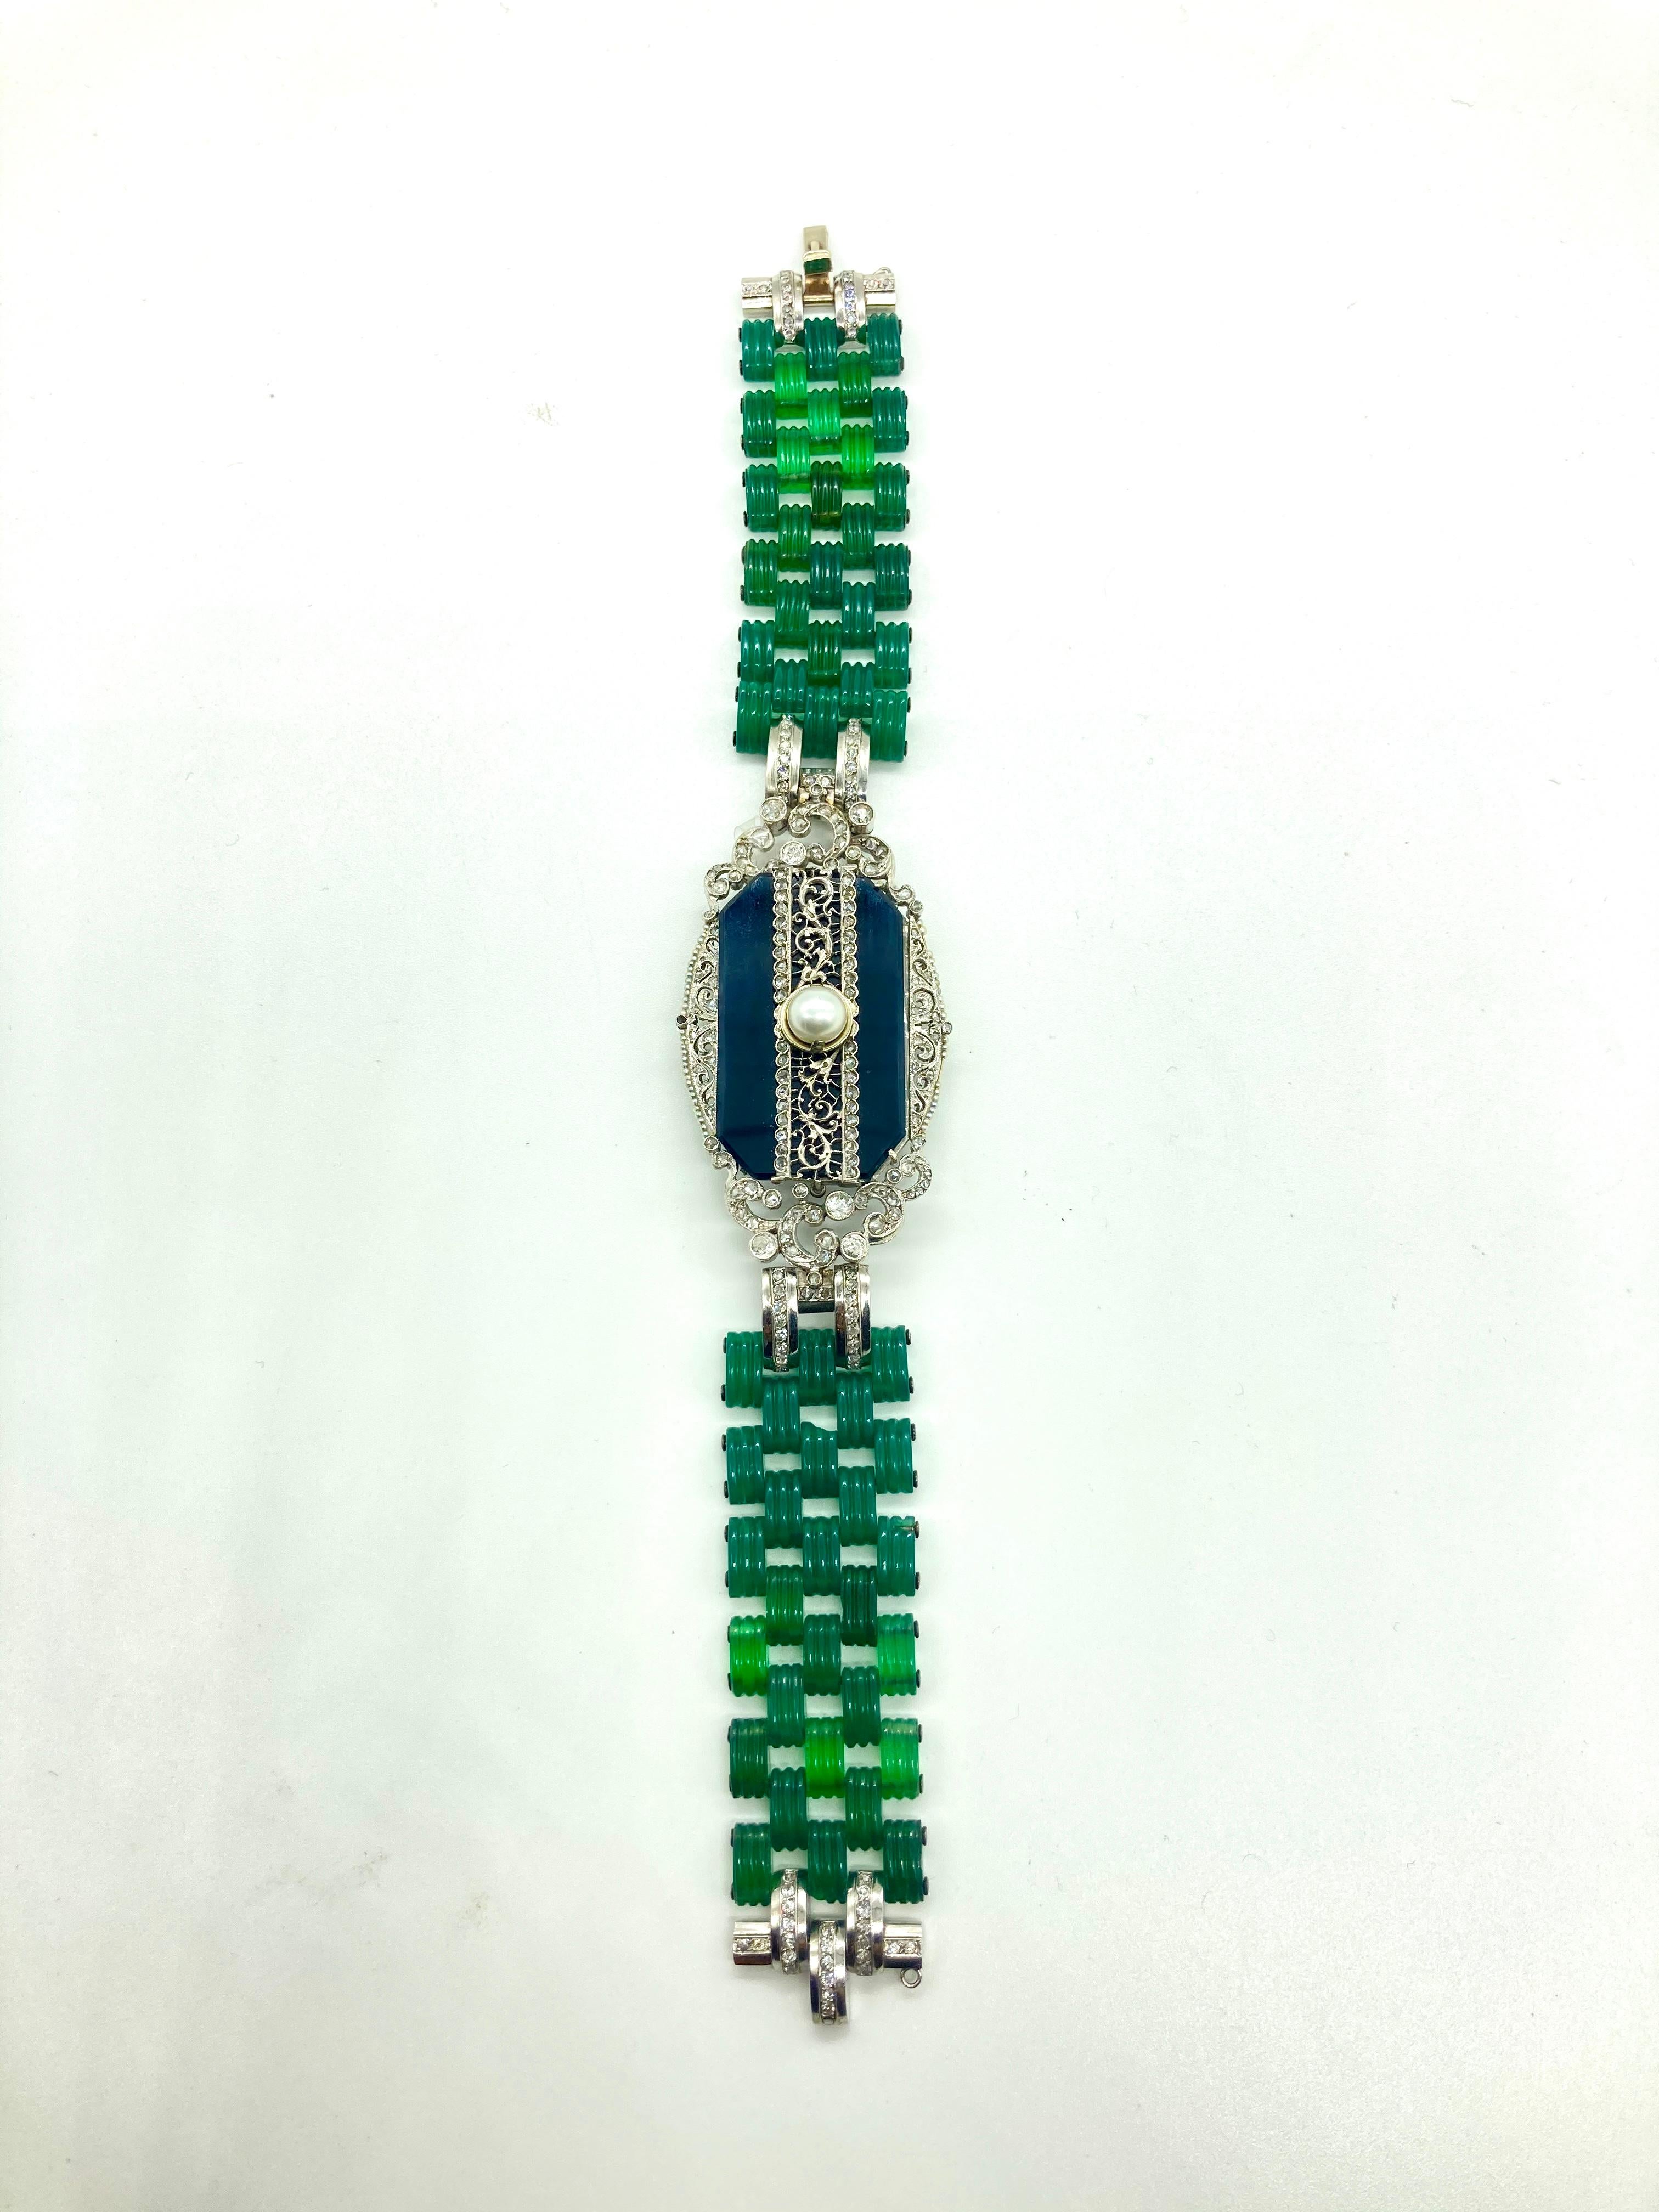 A beautiful Art Deco bracelet featuring fluted chrysoprase, onyx, pearl, and diamonds. Circa 1920.